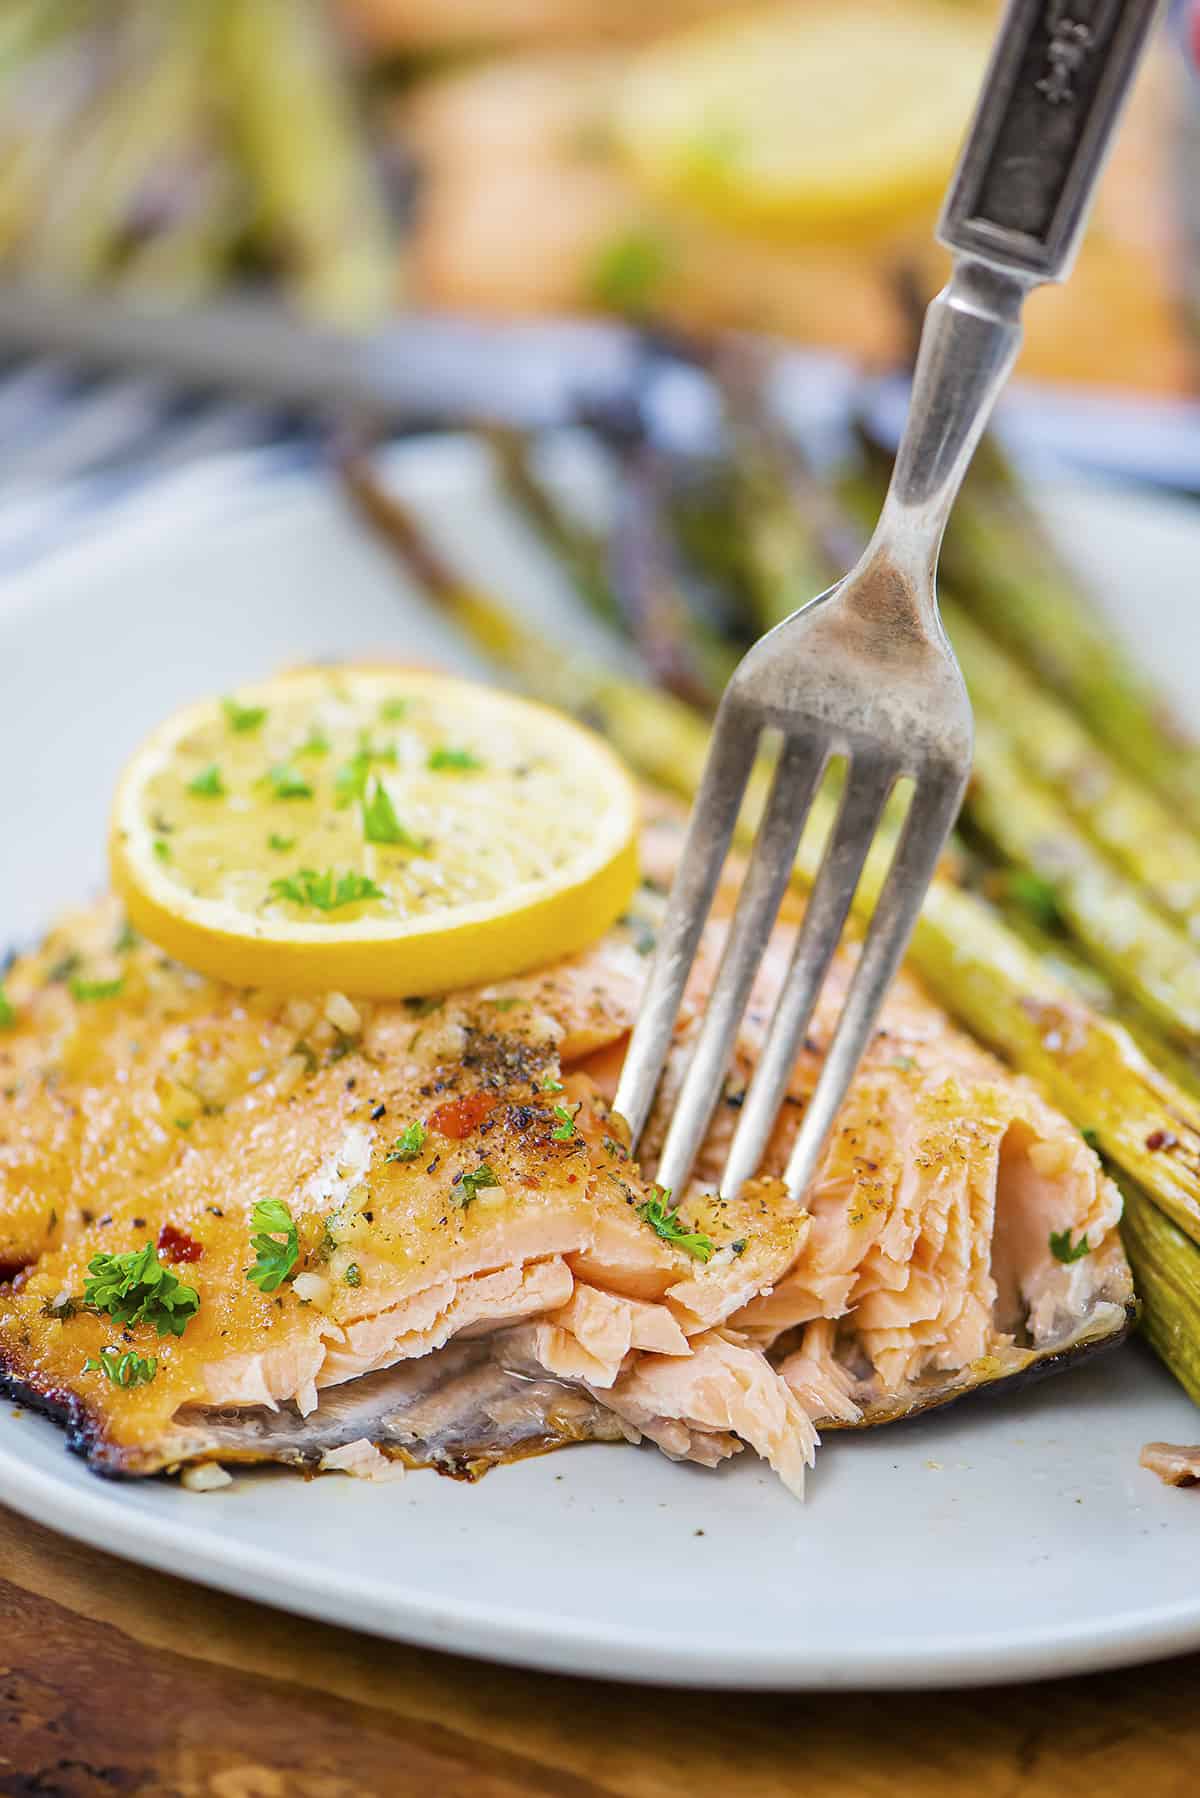 Piece of salmon on plate with a fork.